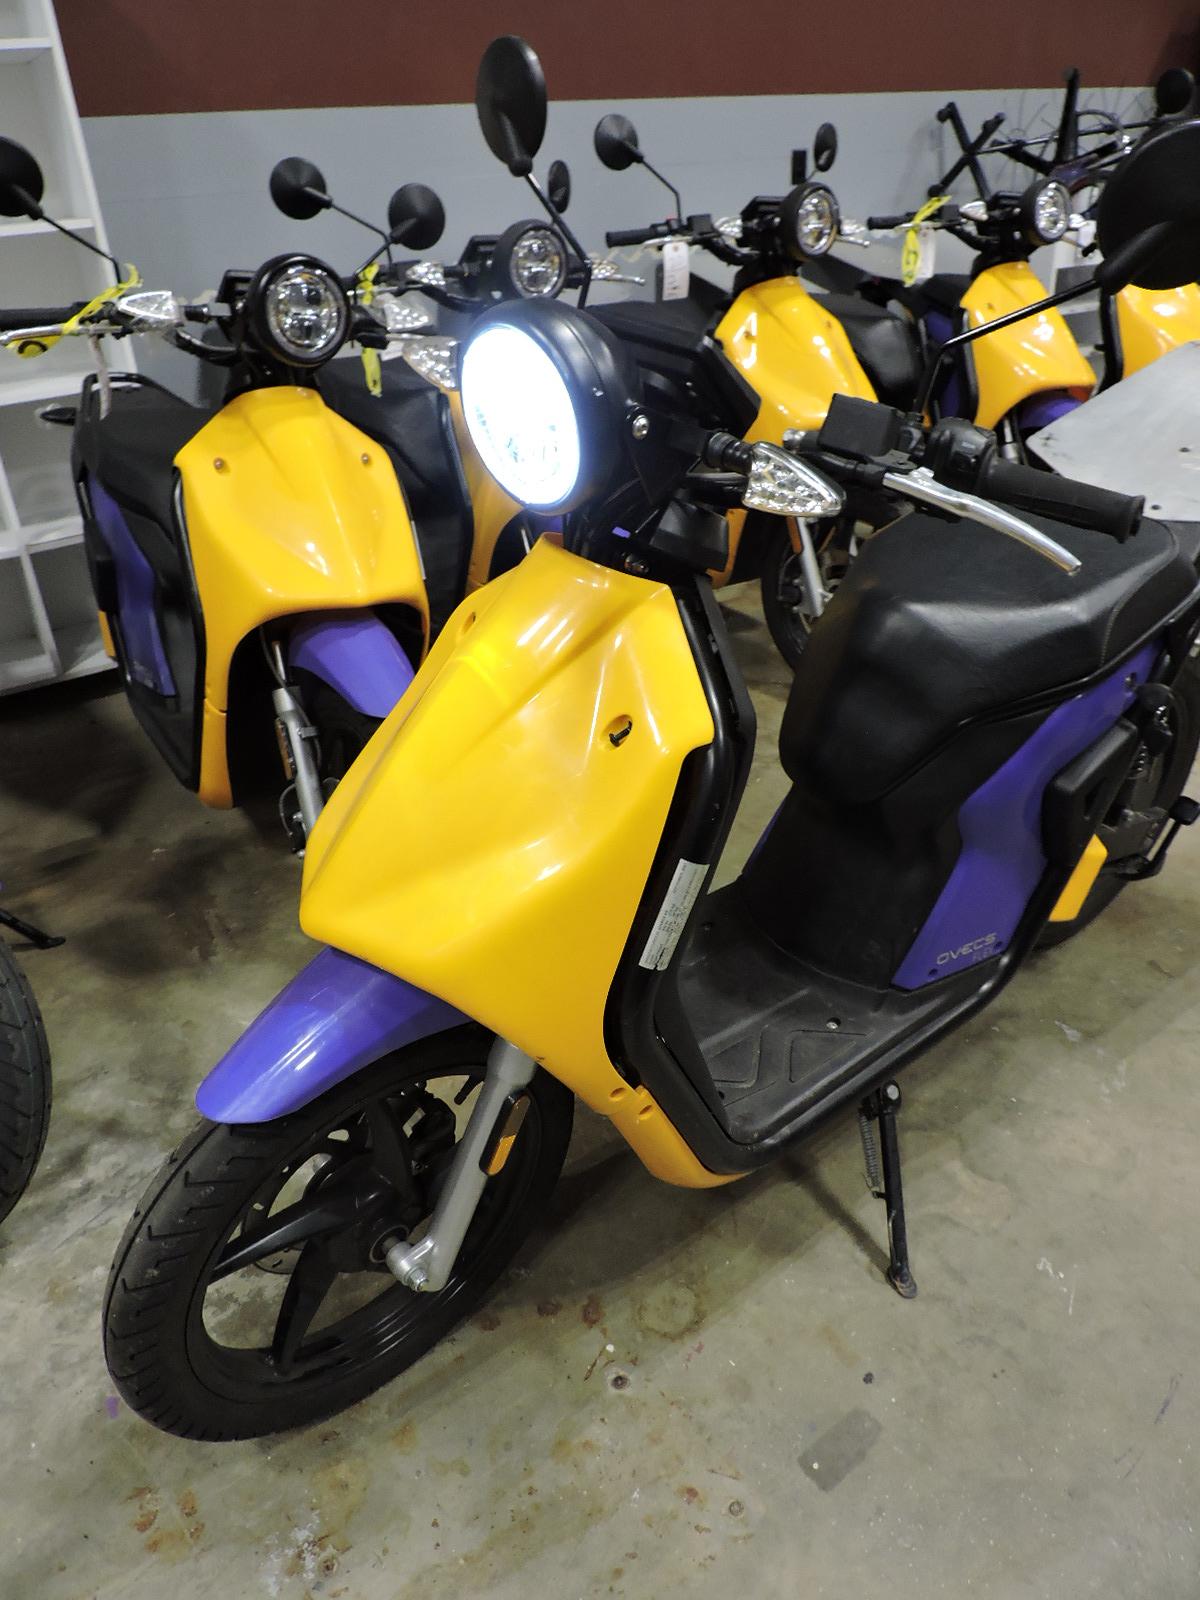 GOVECS FLEX 2.0 - Electric Scooter - Moped / 1799.8 Mi / 2 Keys, Battery & Charger -NOT RUNNING